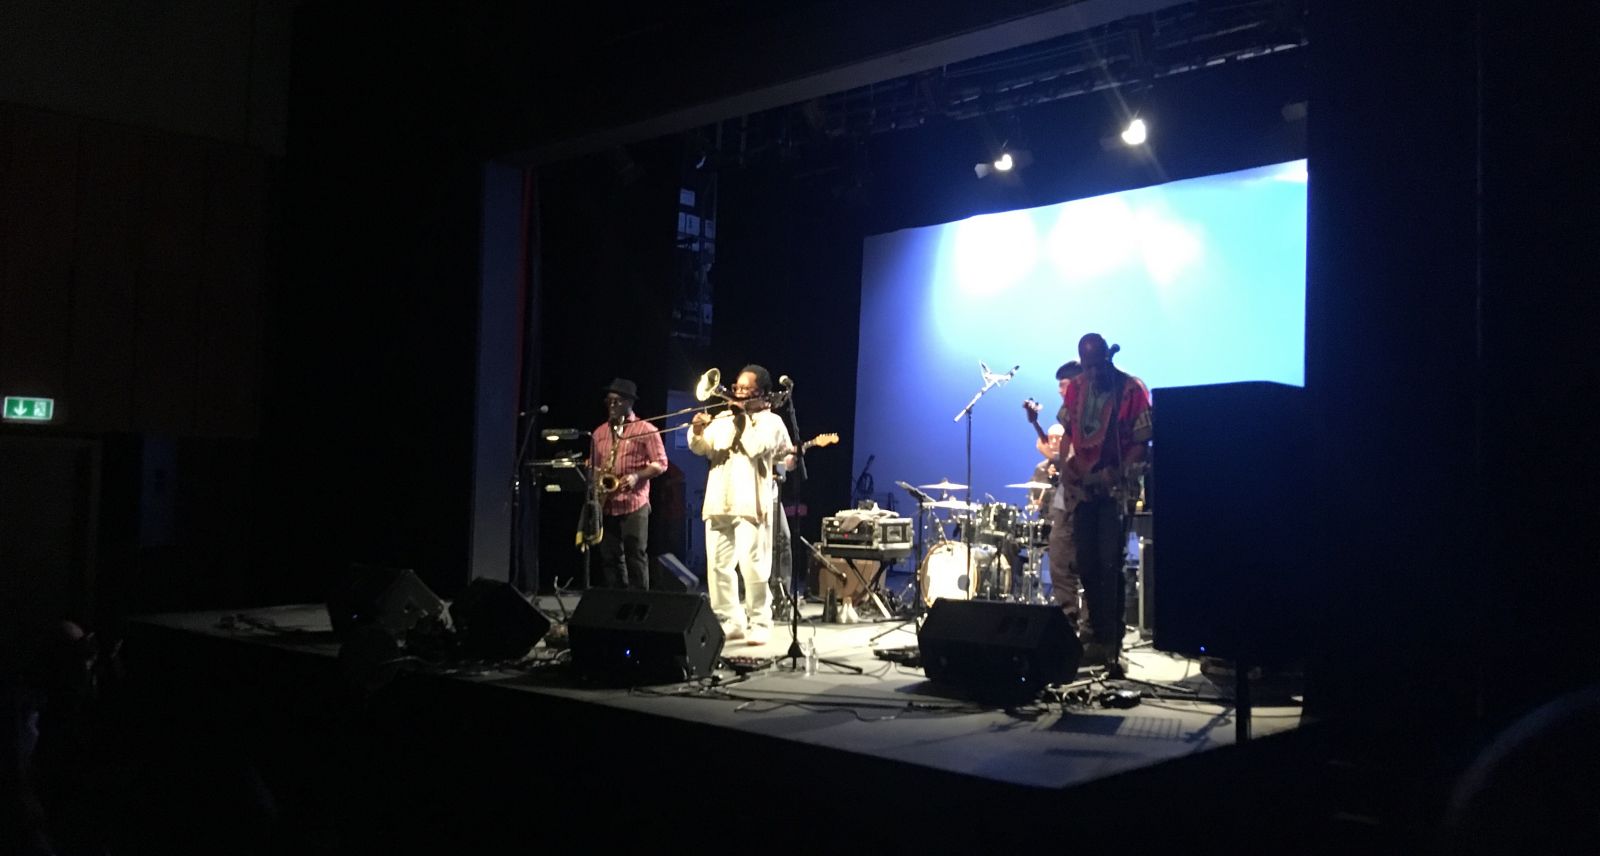 Dennis Rollins' Funky Funk on Sunday night at the 2019 Bristol International Jazz and Blues Festival.